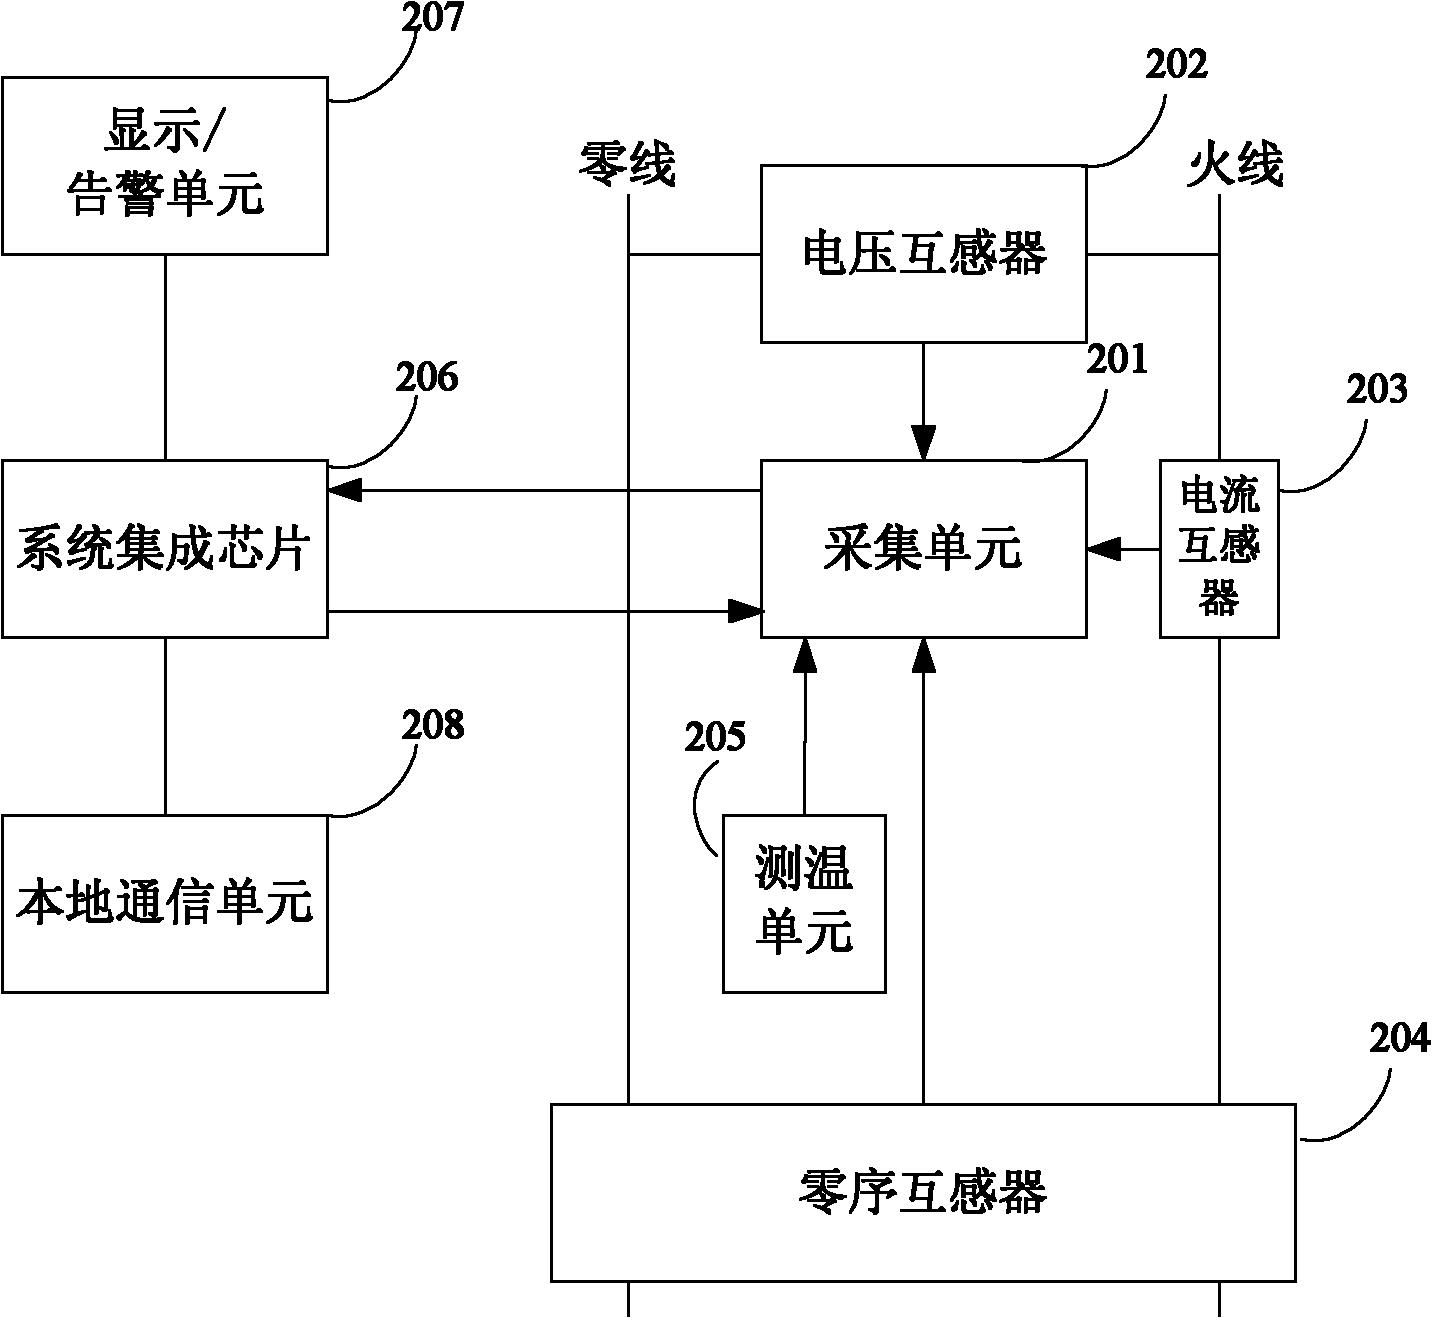 Power supply loop monitoring device and system